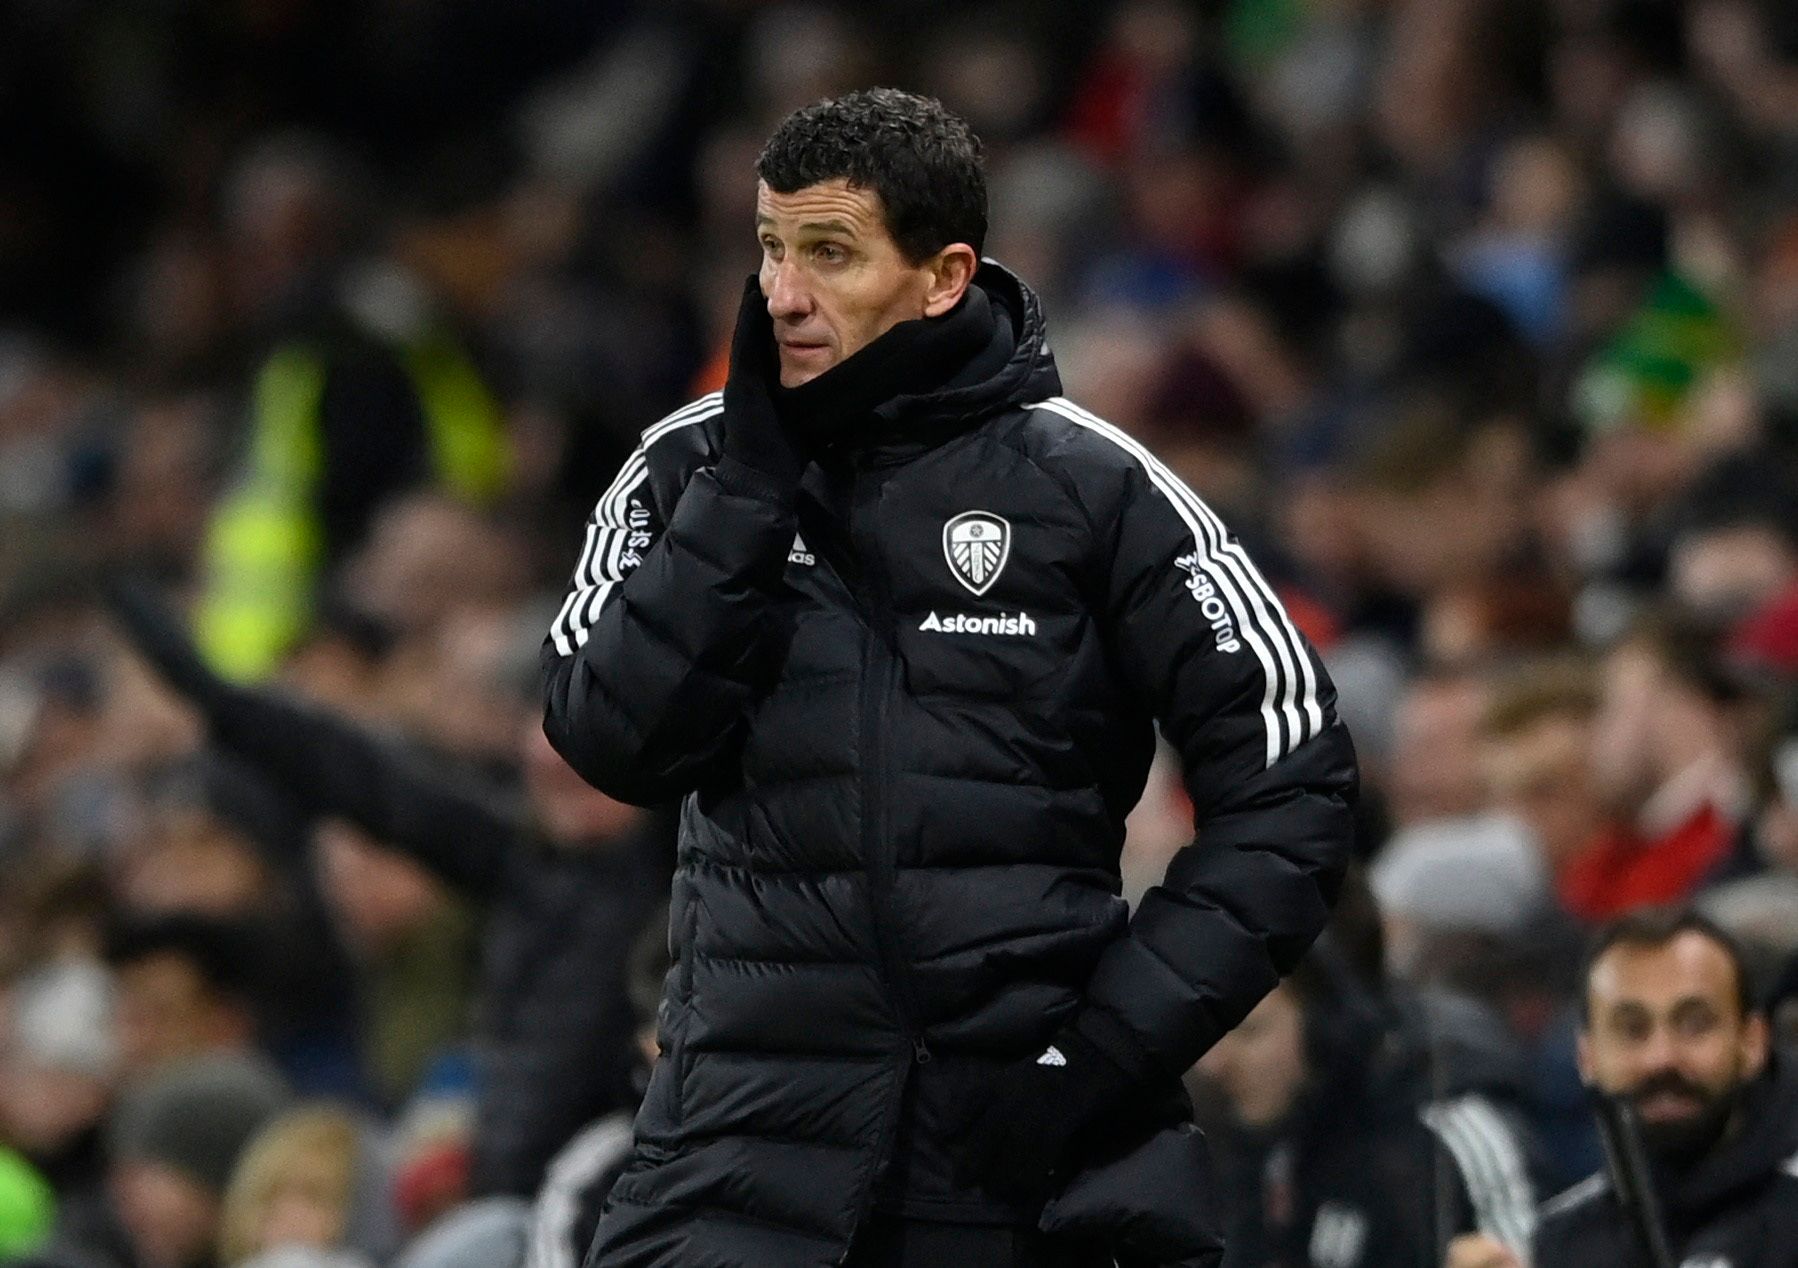 Soccer Football - FA Cup - Fifth Round - Fulham v Leeds United - Craven Cottage, London, Britain - February 28, 2023 Leeds United manager Javi Gracia REUTERS/Tony Obrien